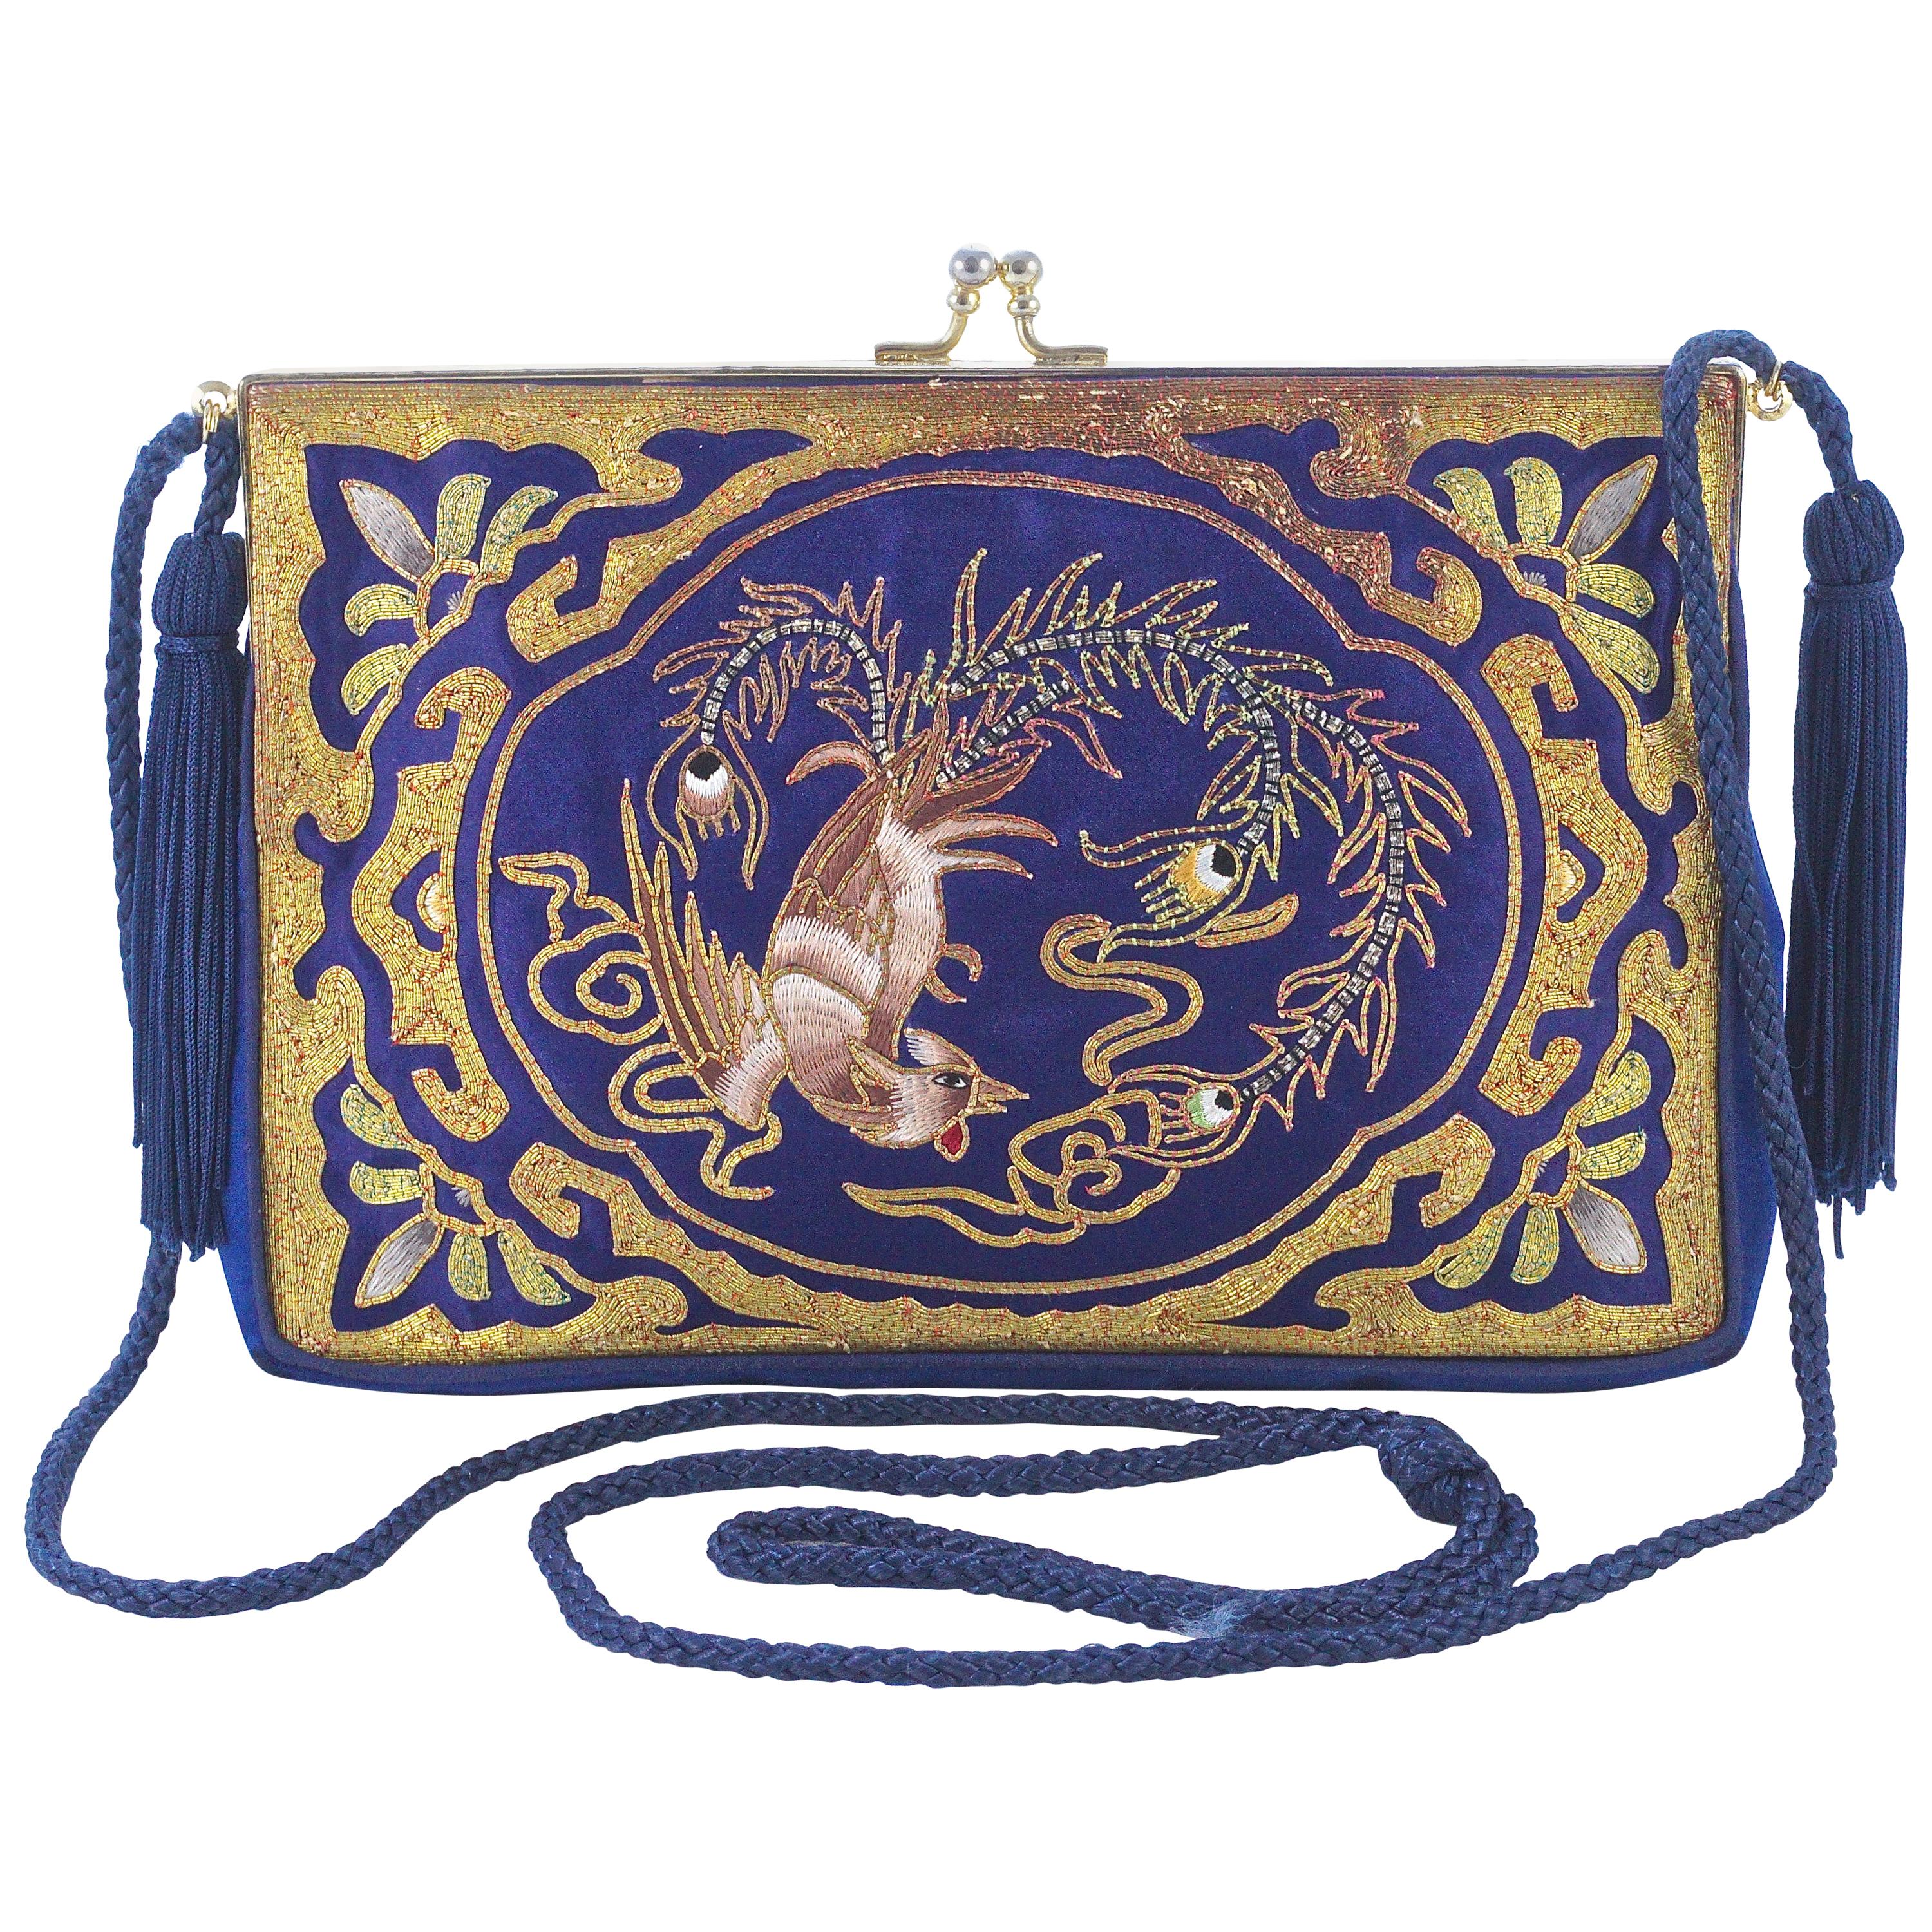 Chinese Blue Silk Embroidered Rooster Design Evening Bag circa 1930s